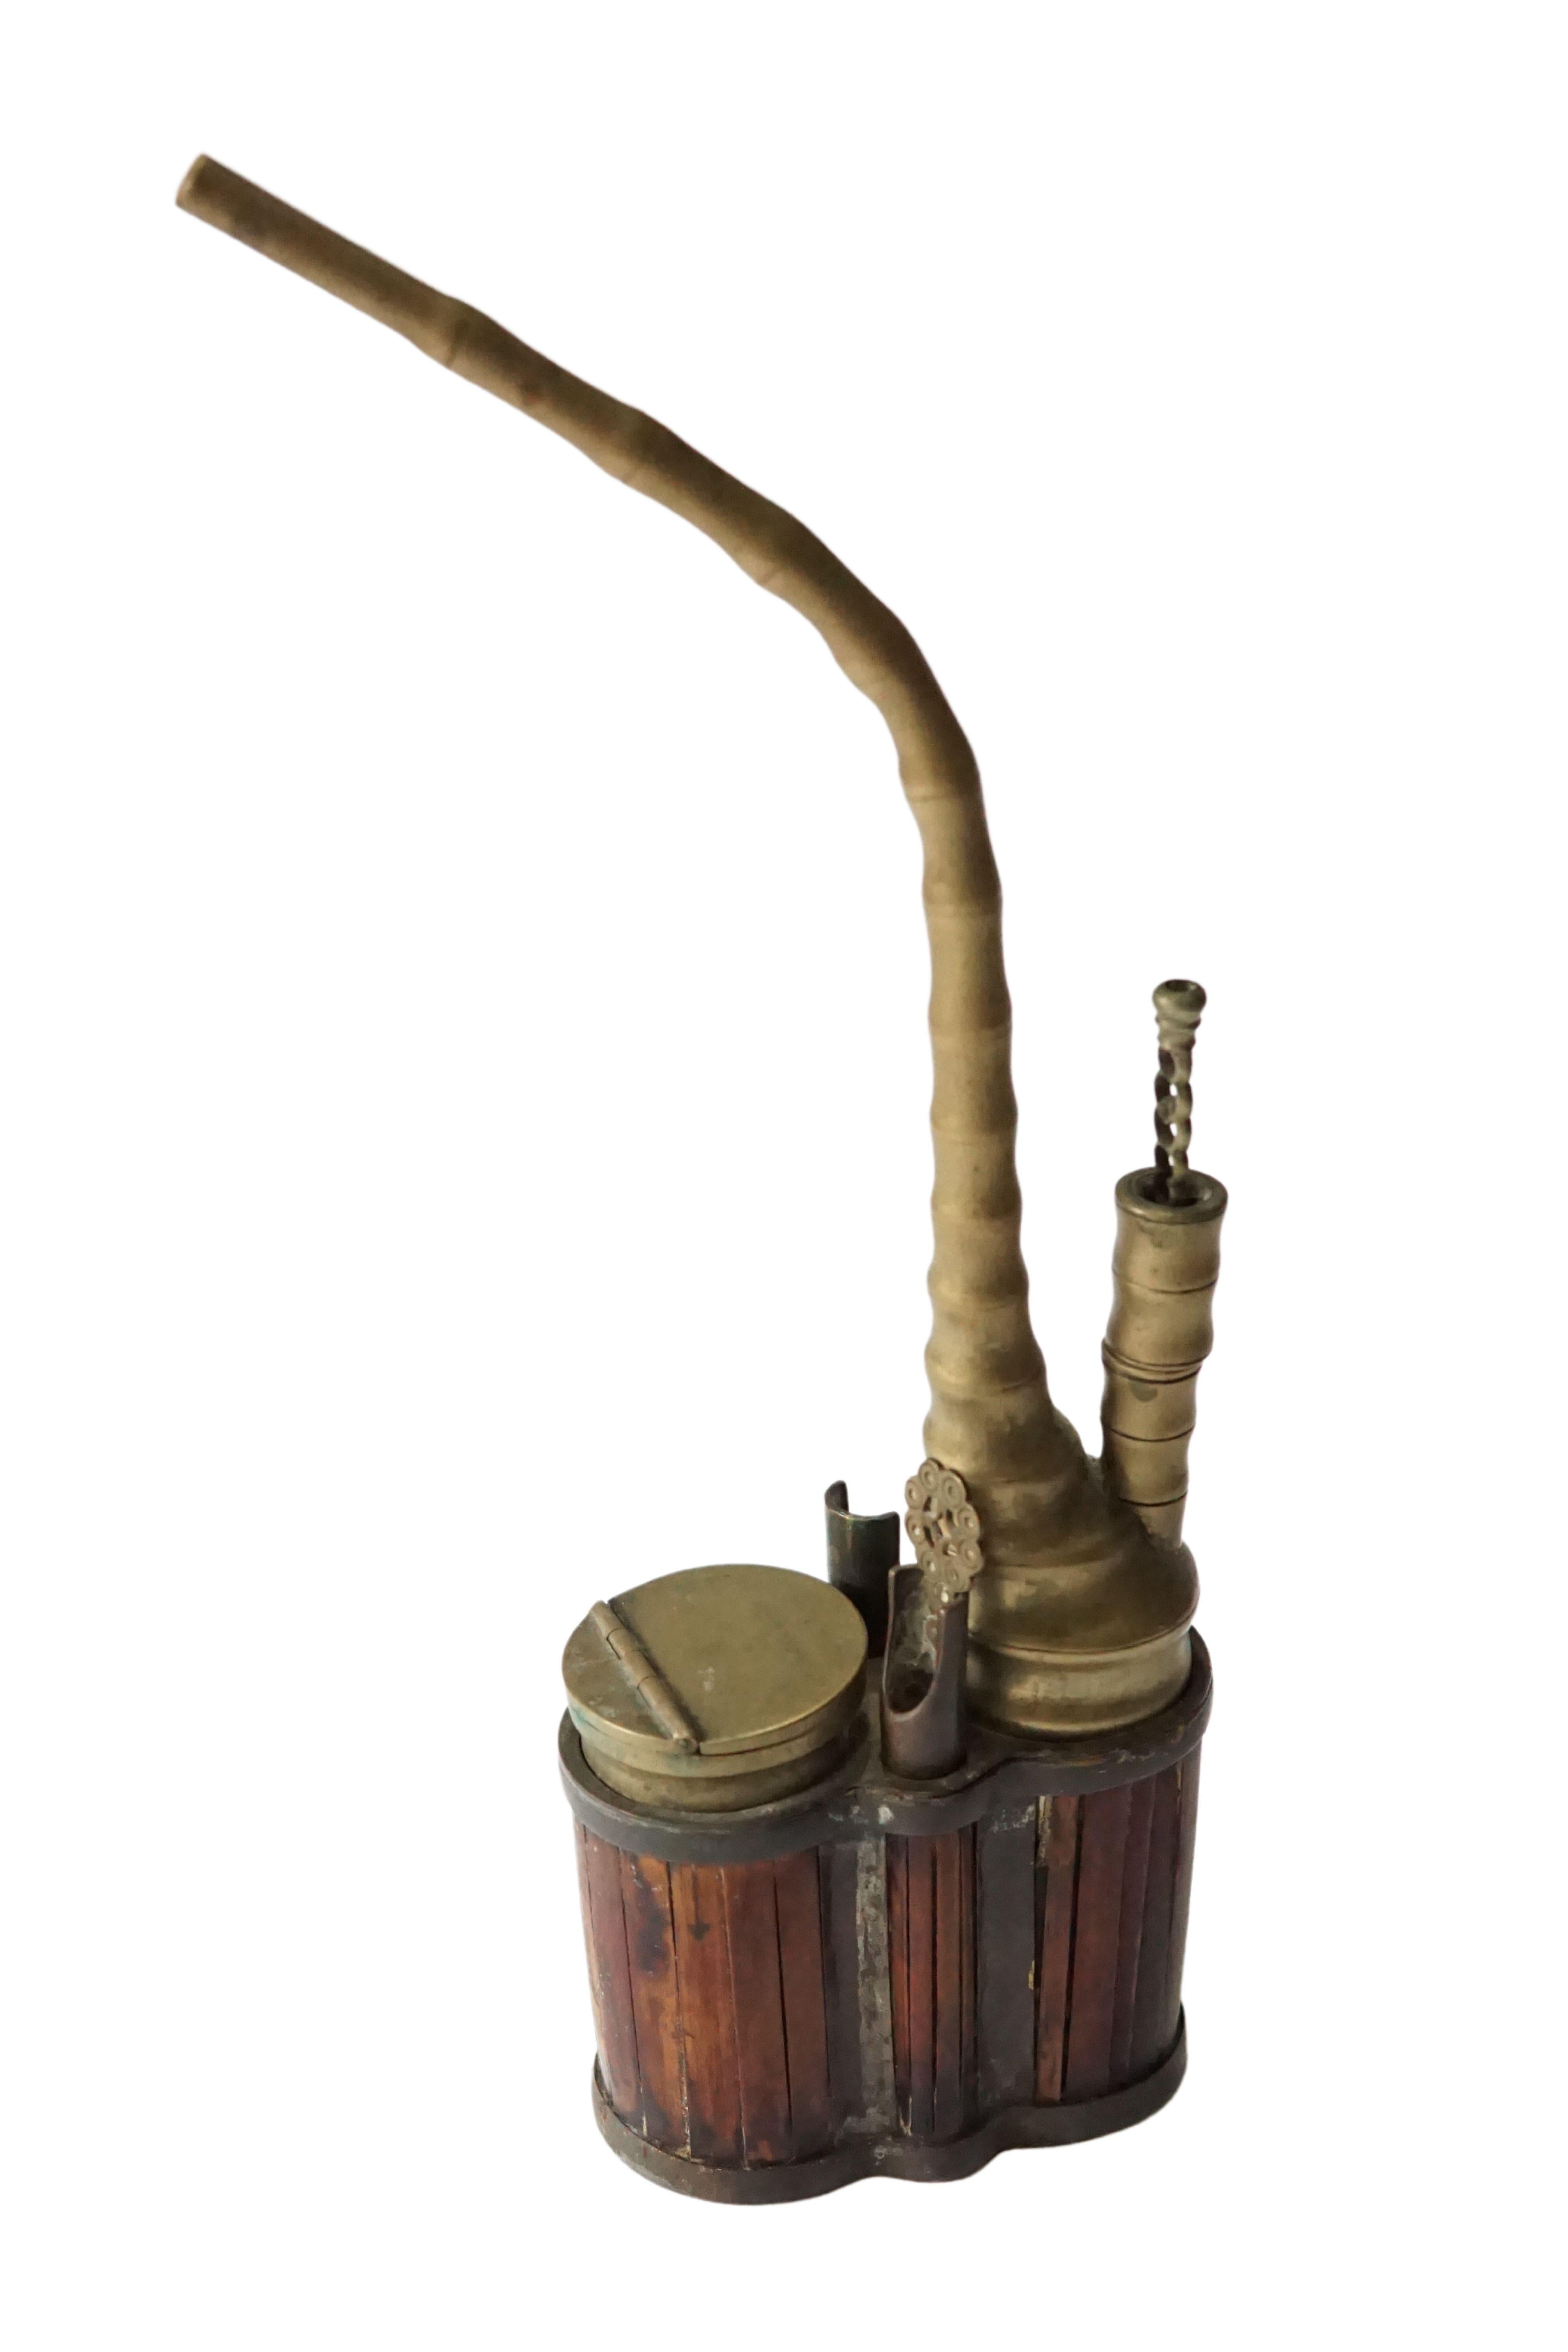 Despite common belief that water pipes such as these were used to smoke opium, water pipes such as these were more commonly used for smoking Tobacco. The hinged compartment is where the tobacco would be placed for smoking. This pipe features Chinese